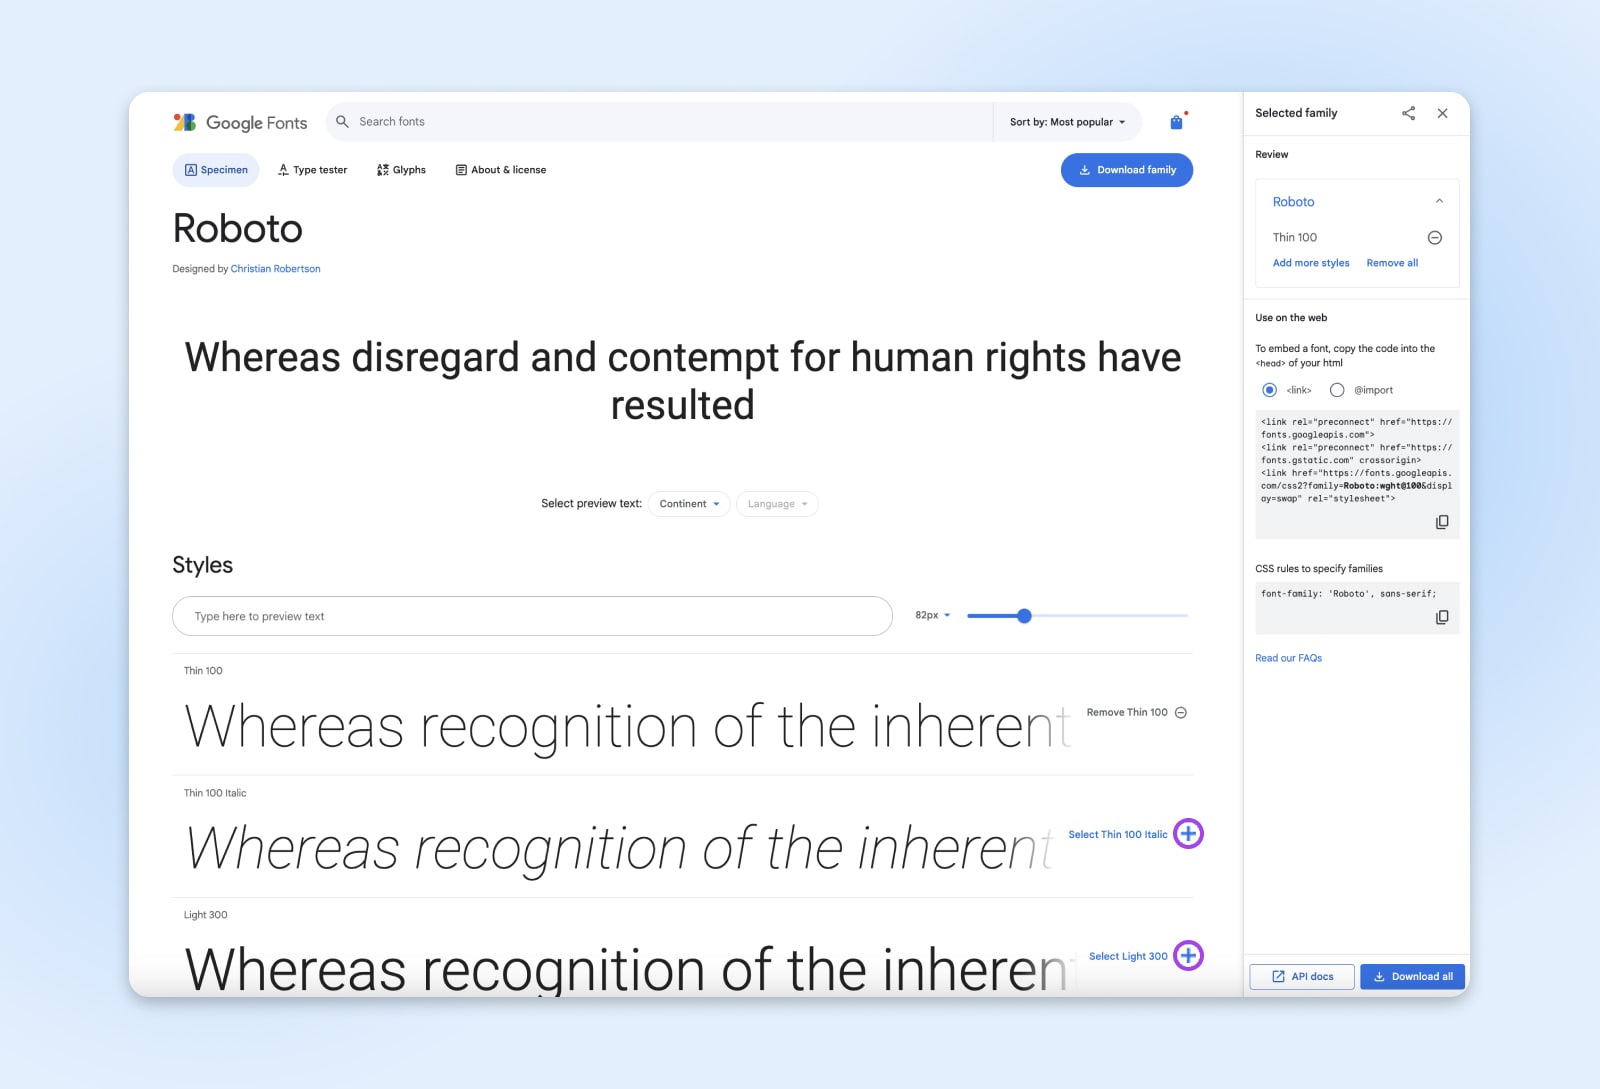 Google fonts page for Roboto highlighting the plus button to the right of the font options where the full font family can be downloaded